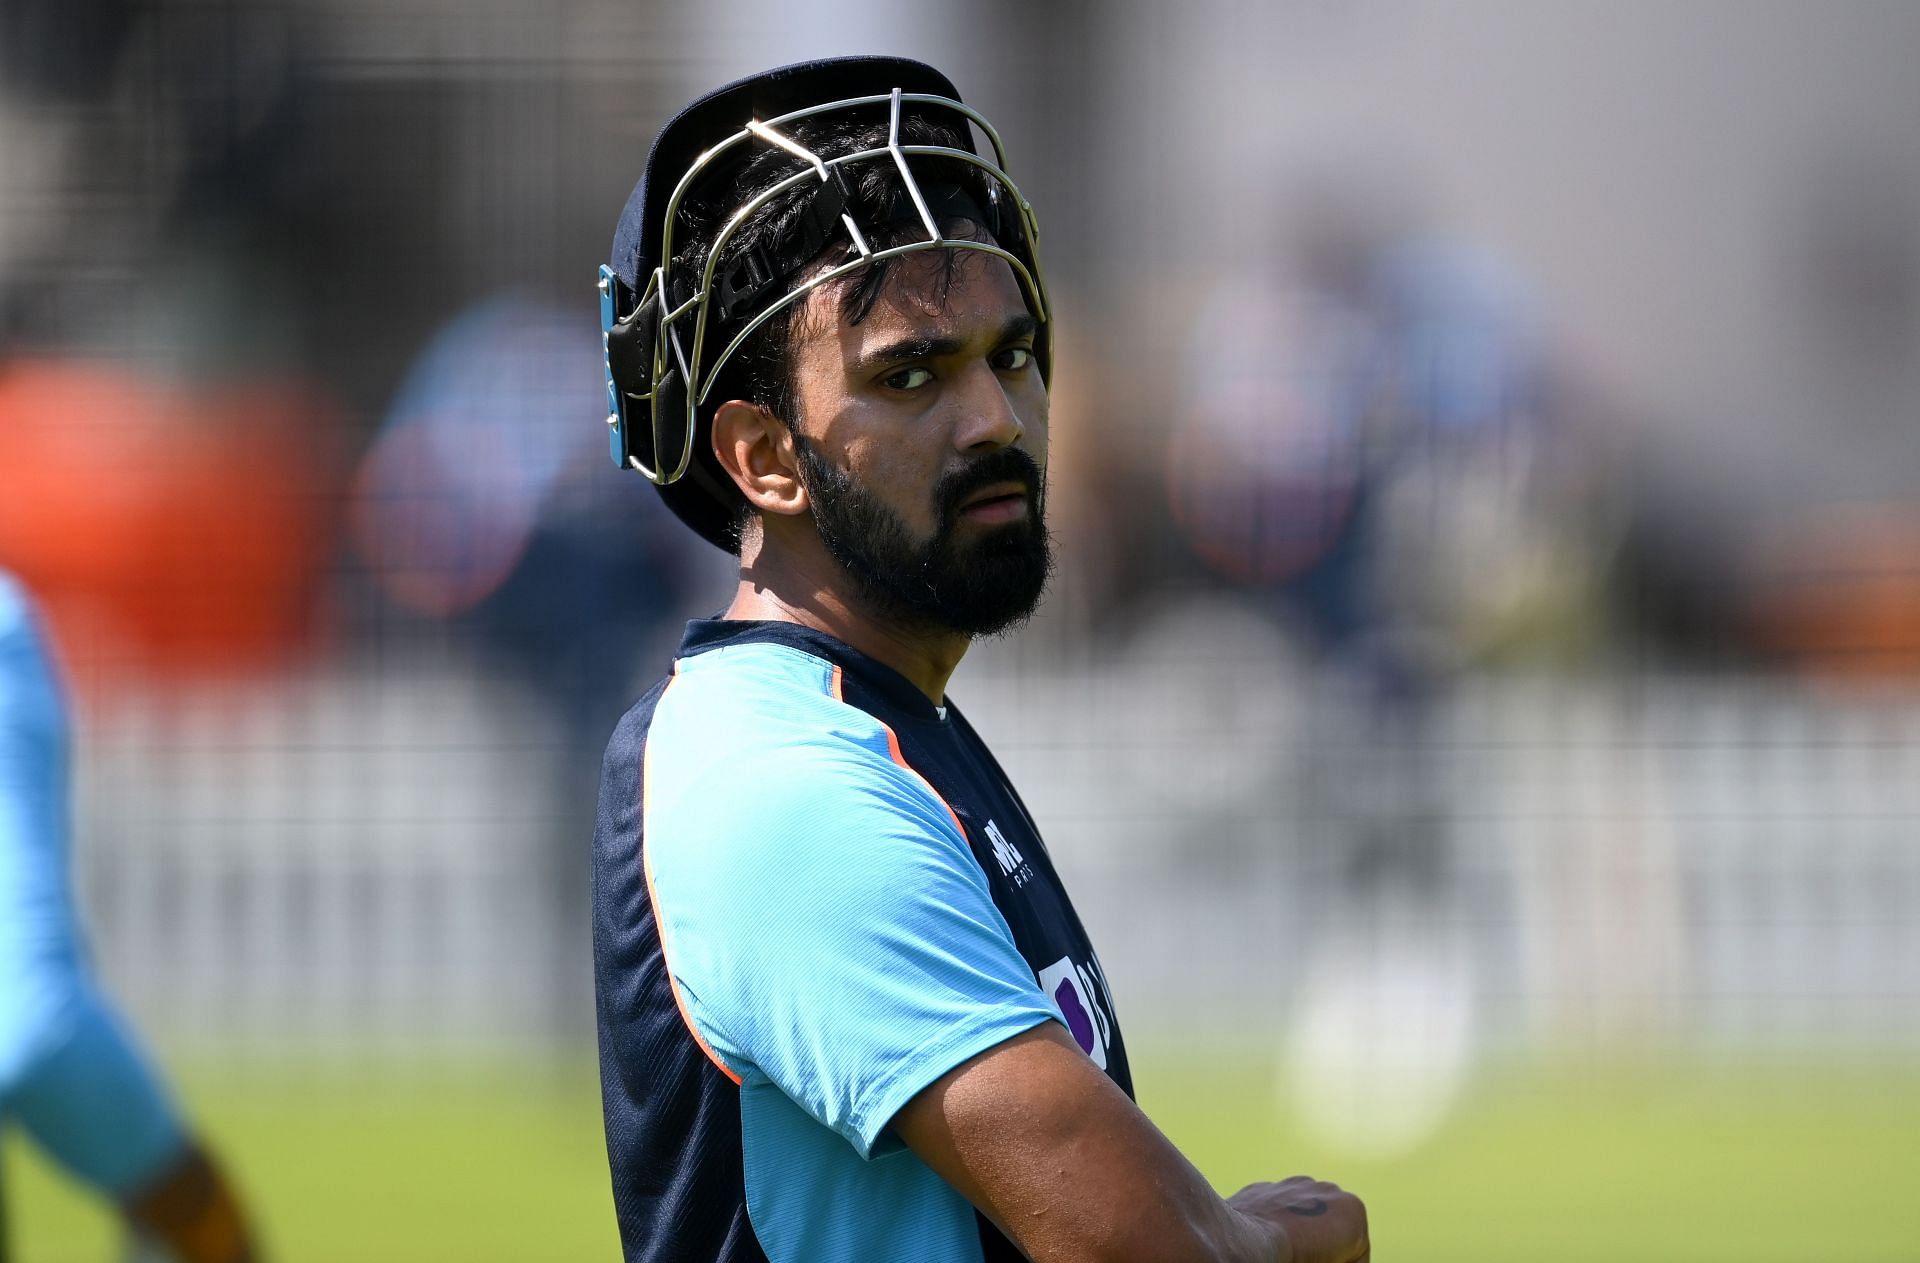 Since the start of 2018, KL Rahul averages 26.57 in 25 Test matches.